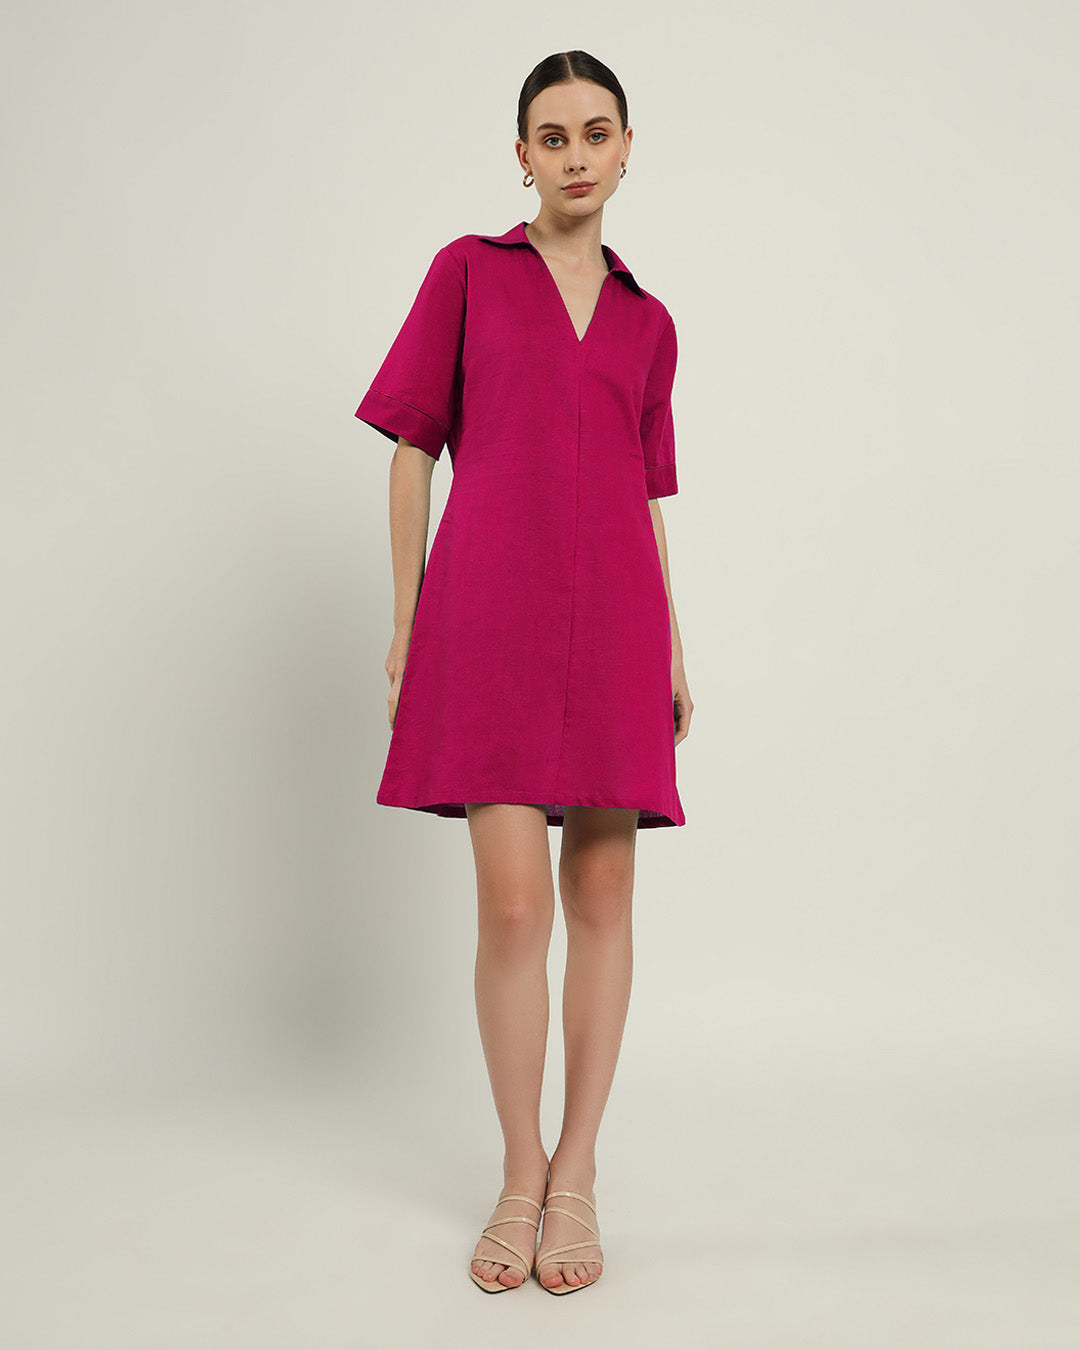 The Ermont Berry Cotton Dress